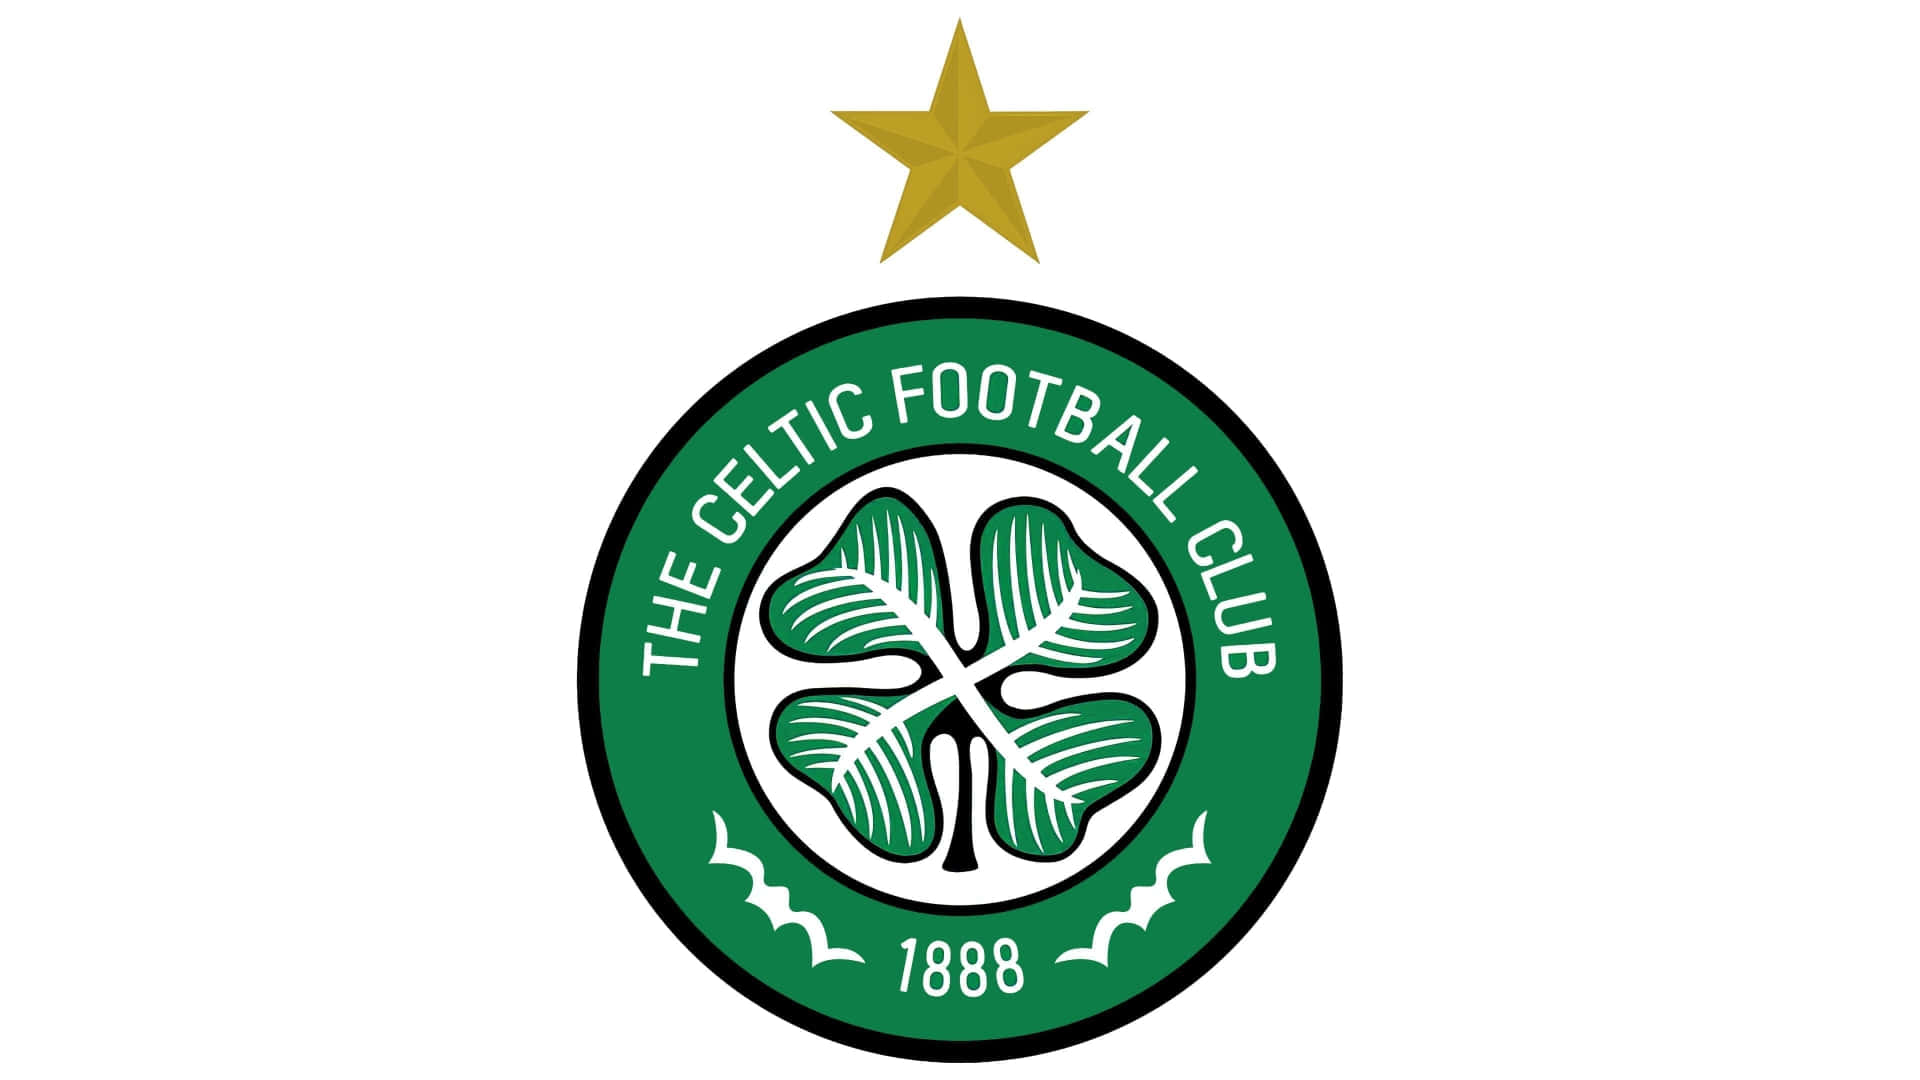 The Green and White of Celtic Football Club Wallpaper